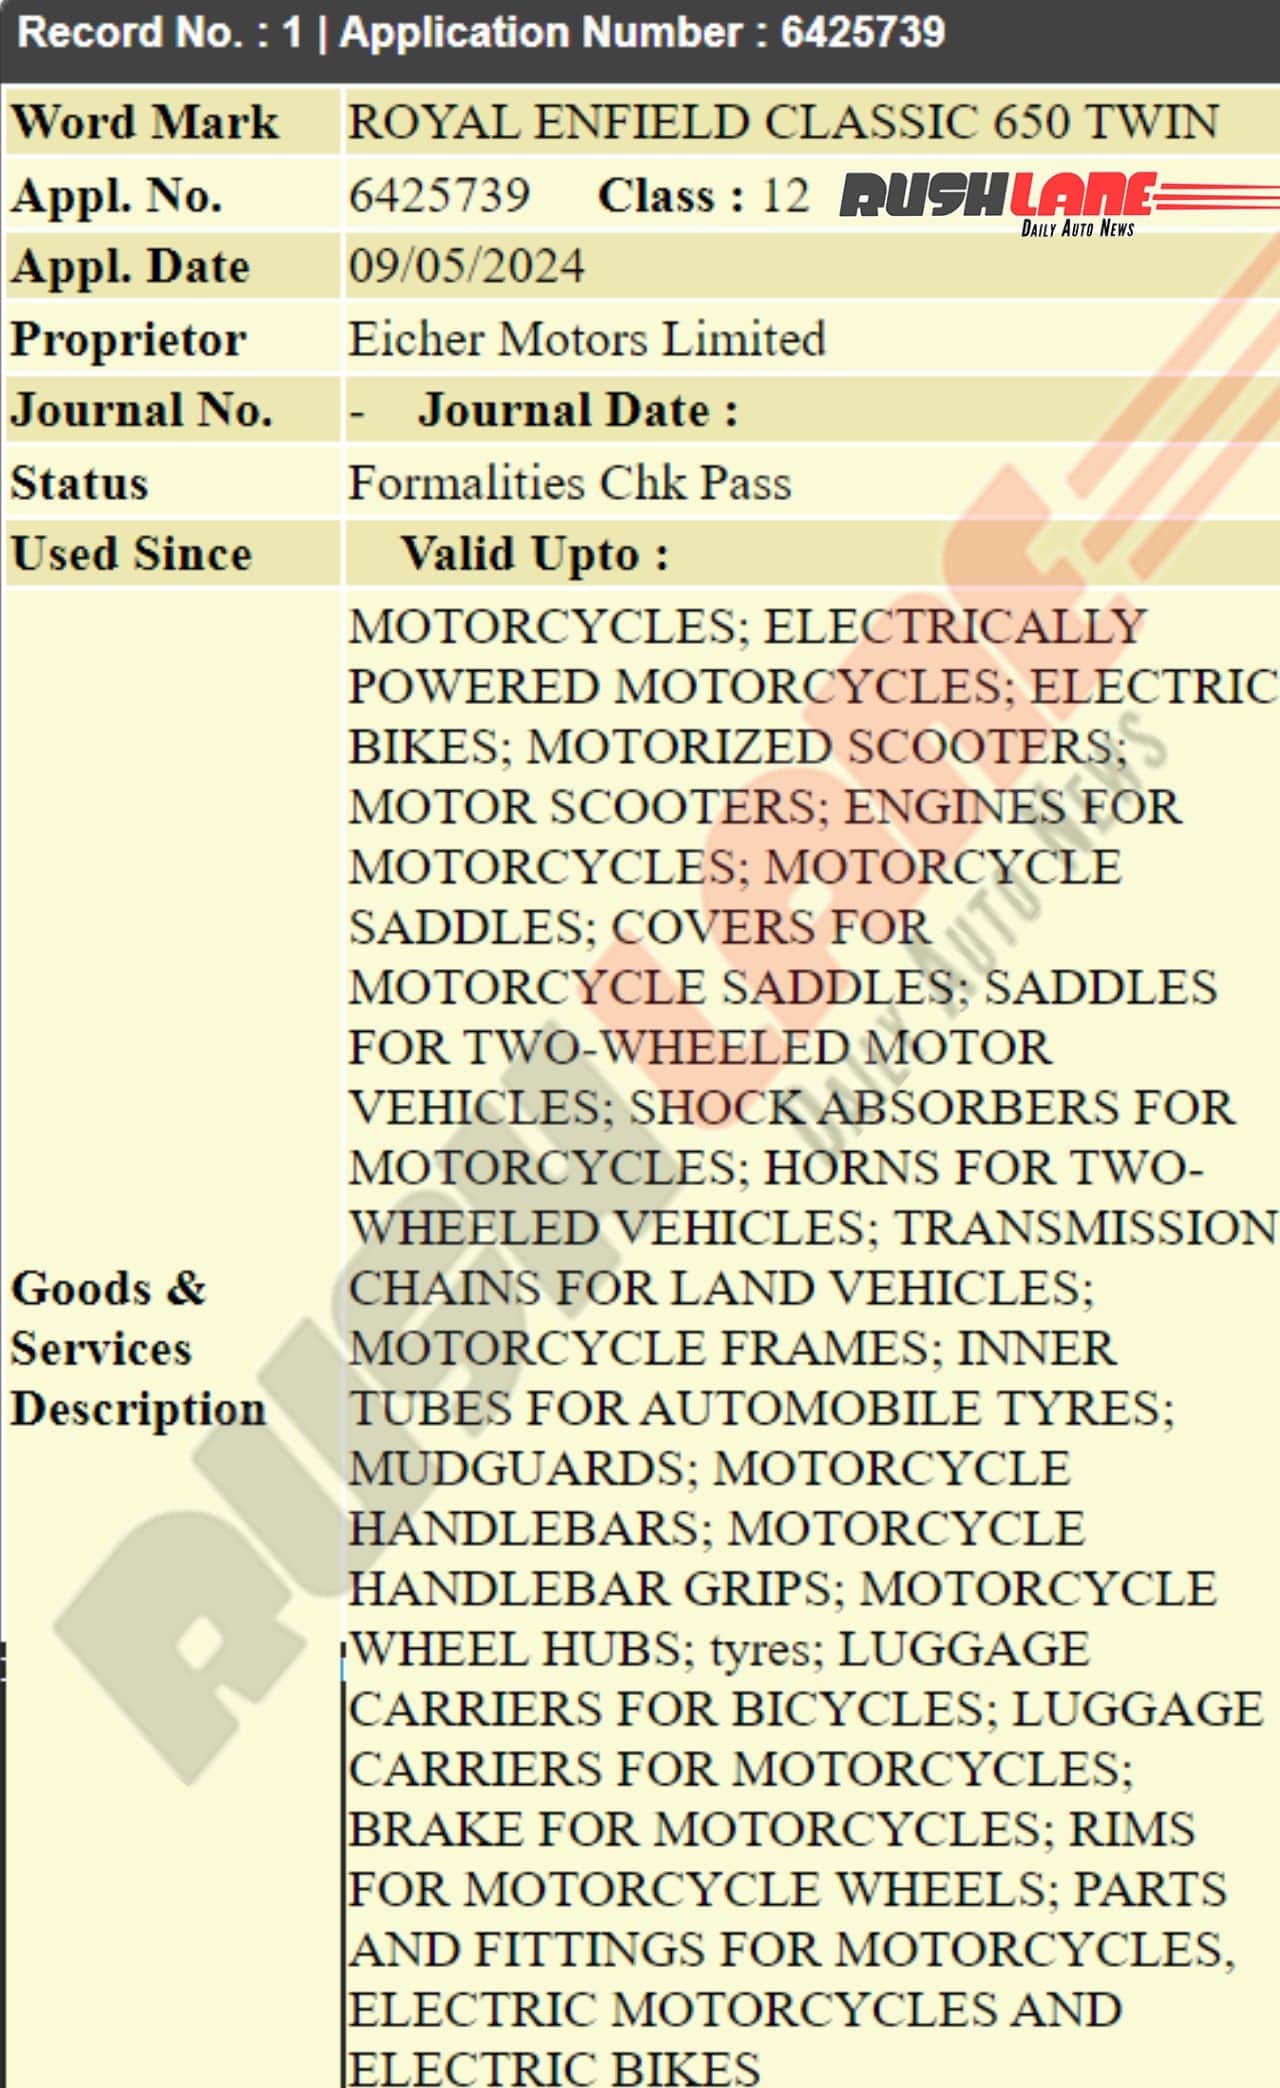 Royal Enfield Classic 650 Twin Trademark Application